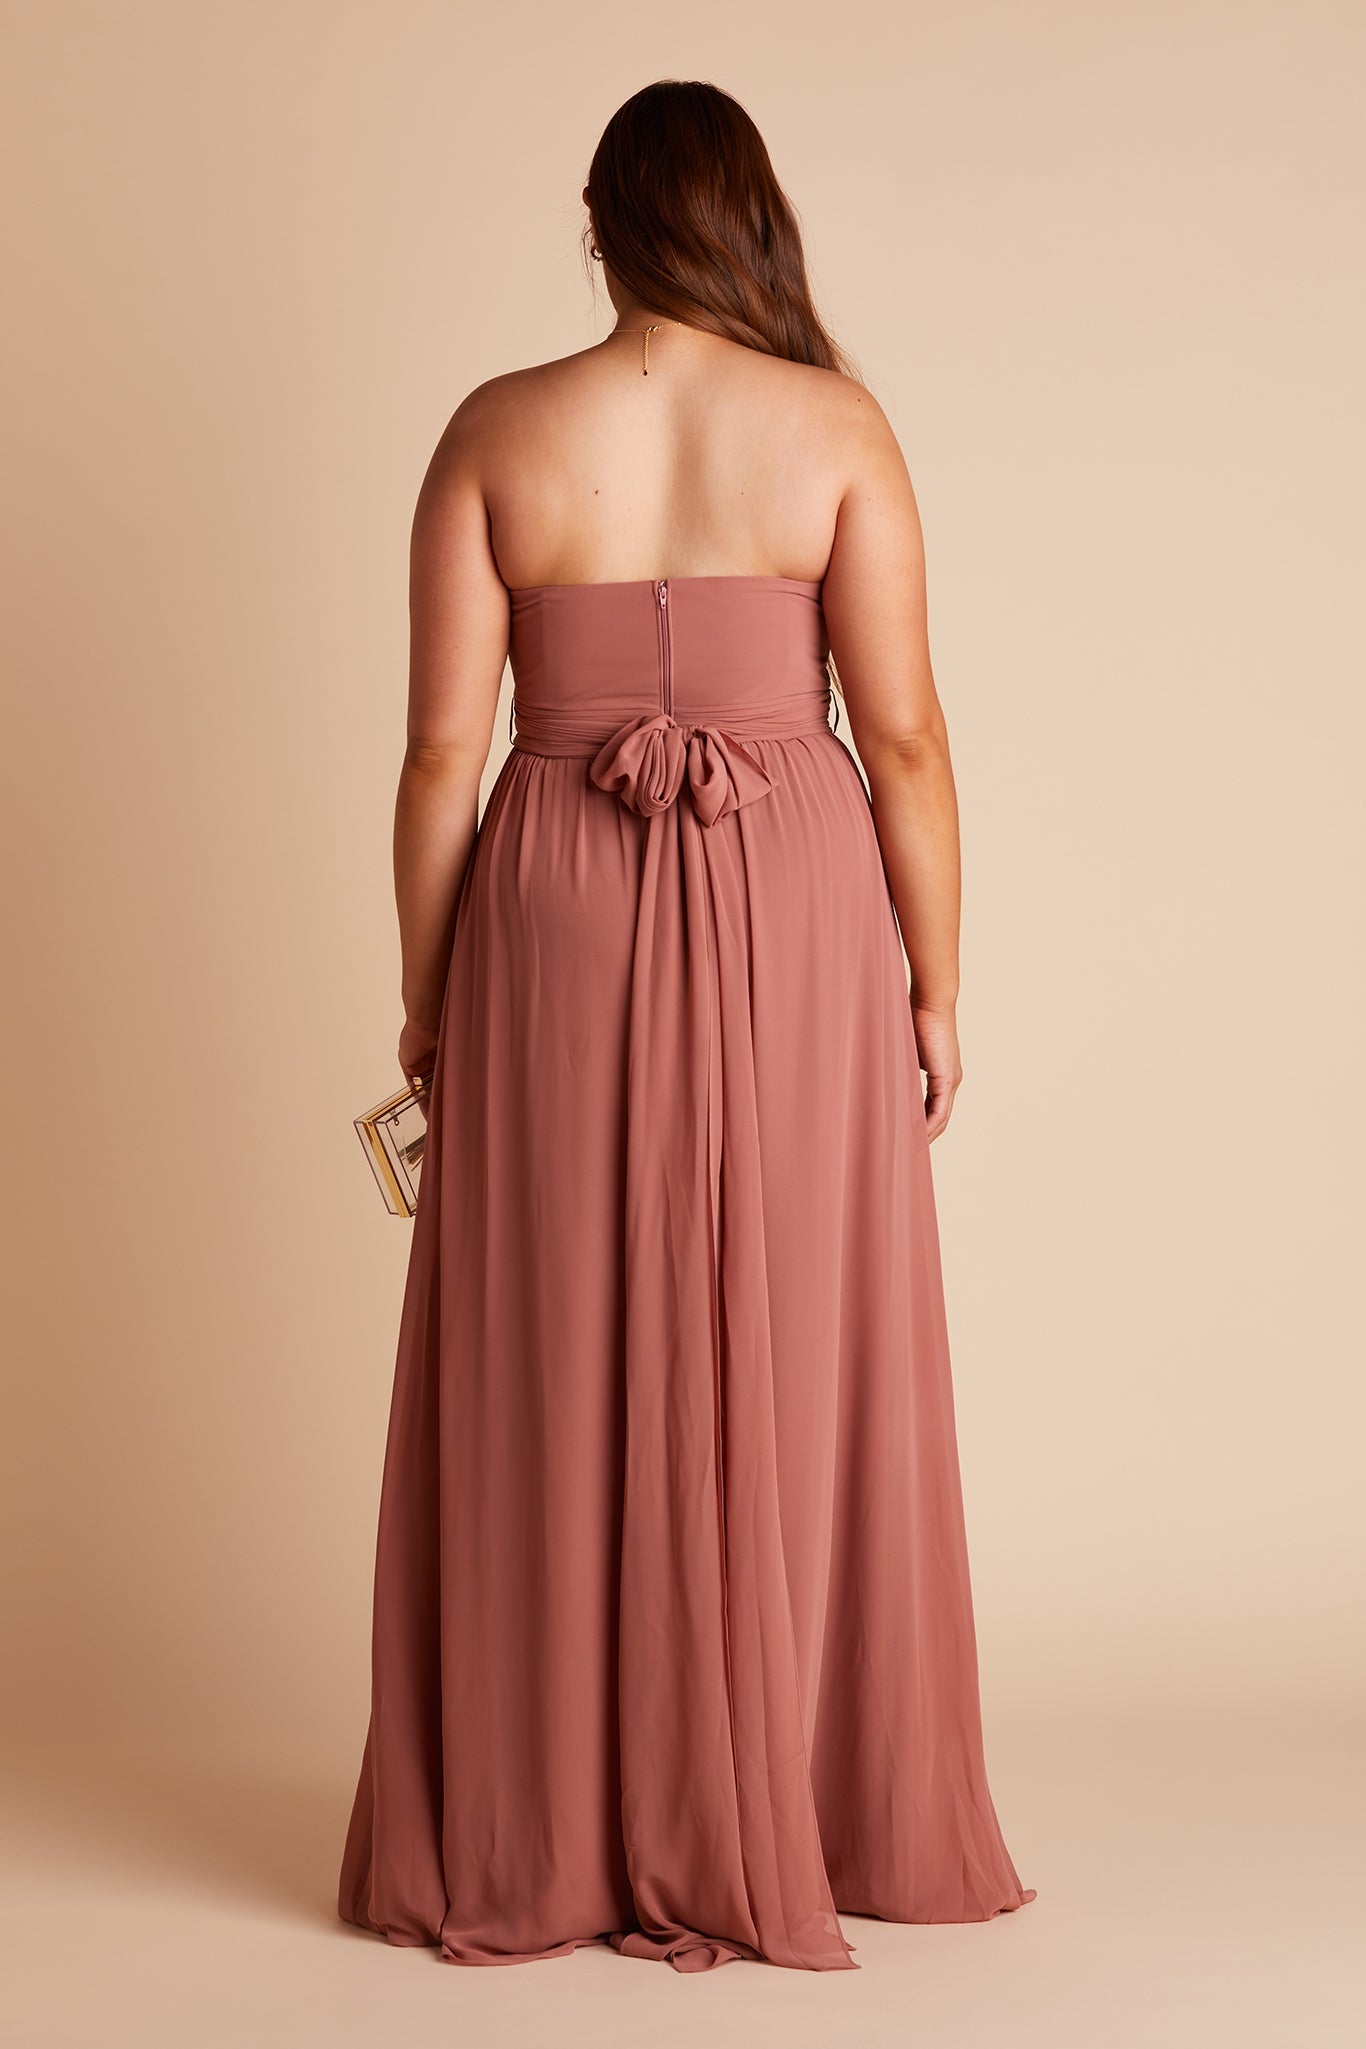 Grace convertible plus size bridesmaid dress in desert rose chiffon by Birdy Grey, back view